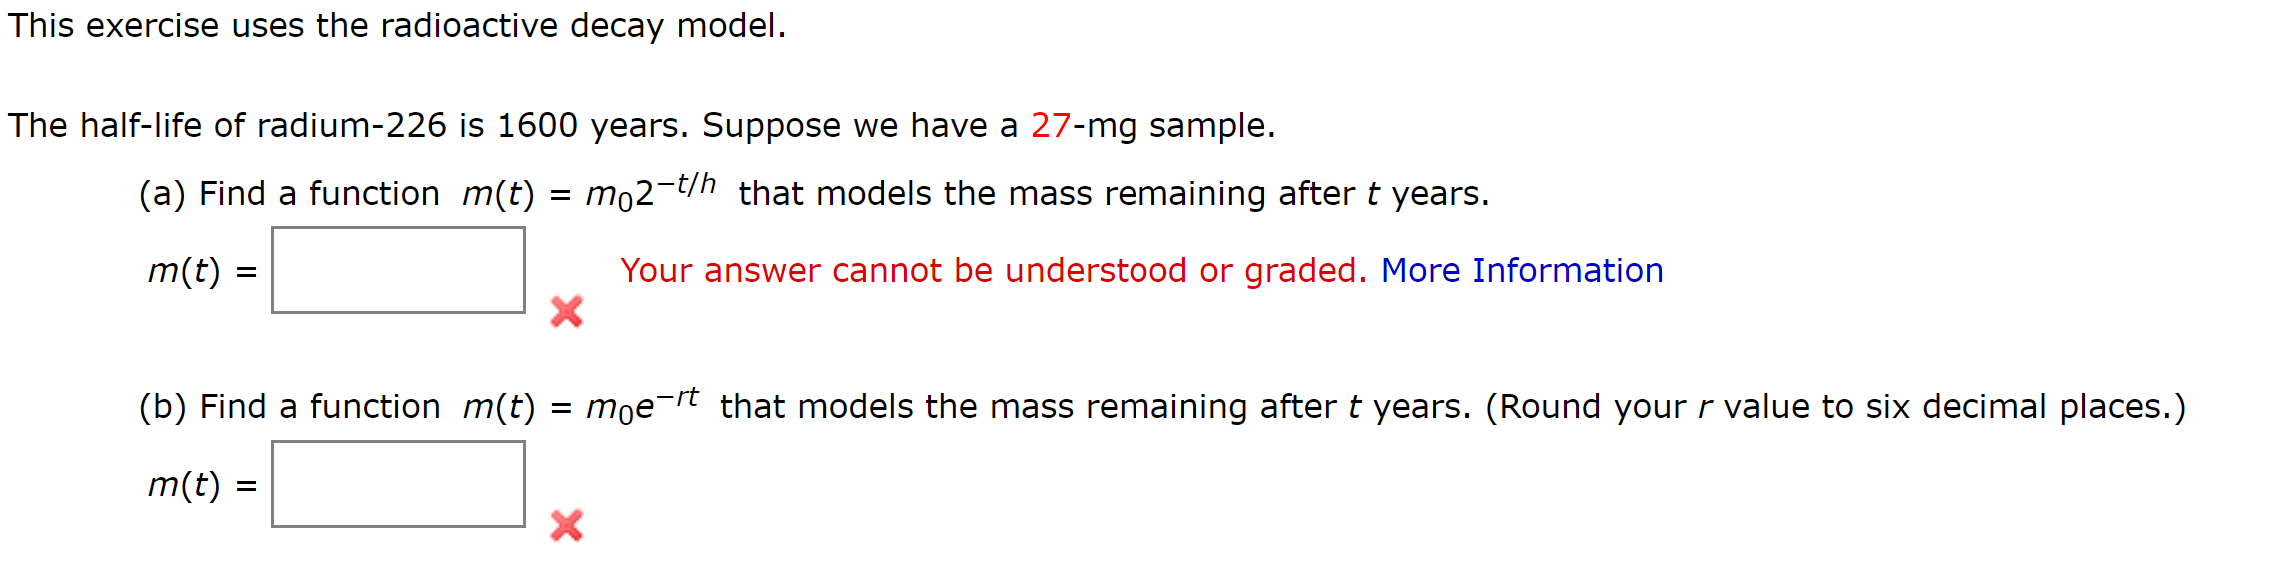 This exercise uses the radioactive decay model.
The half-life of radium-226 is 1600 years. Suppose we have a 27-mg sample.
(a) Find a function m(t)
mo2-t/h that models the mass remaining after t years.
m(t)
Your answer cannot be understood or graded. More Information
(b) Find a function m(t)
moe-rt that models the mass remaining after t years. (Round your r value to six decimal places.)
m(t) =
